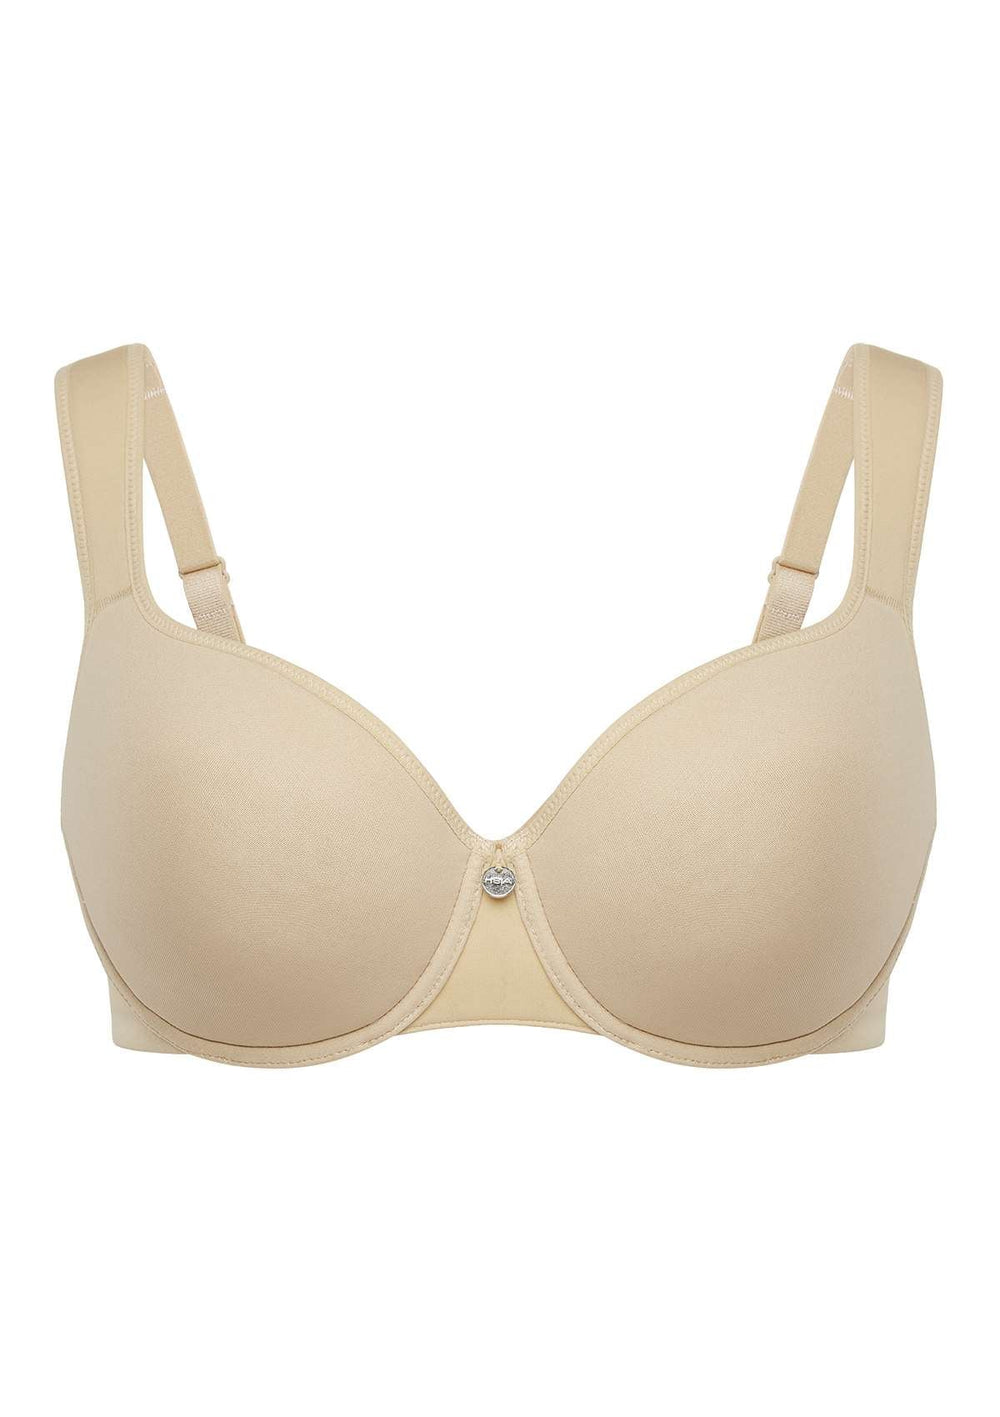 Here's the 411 on Minimizer Bras and How They Can Help Reduce